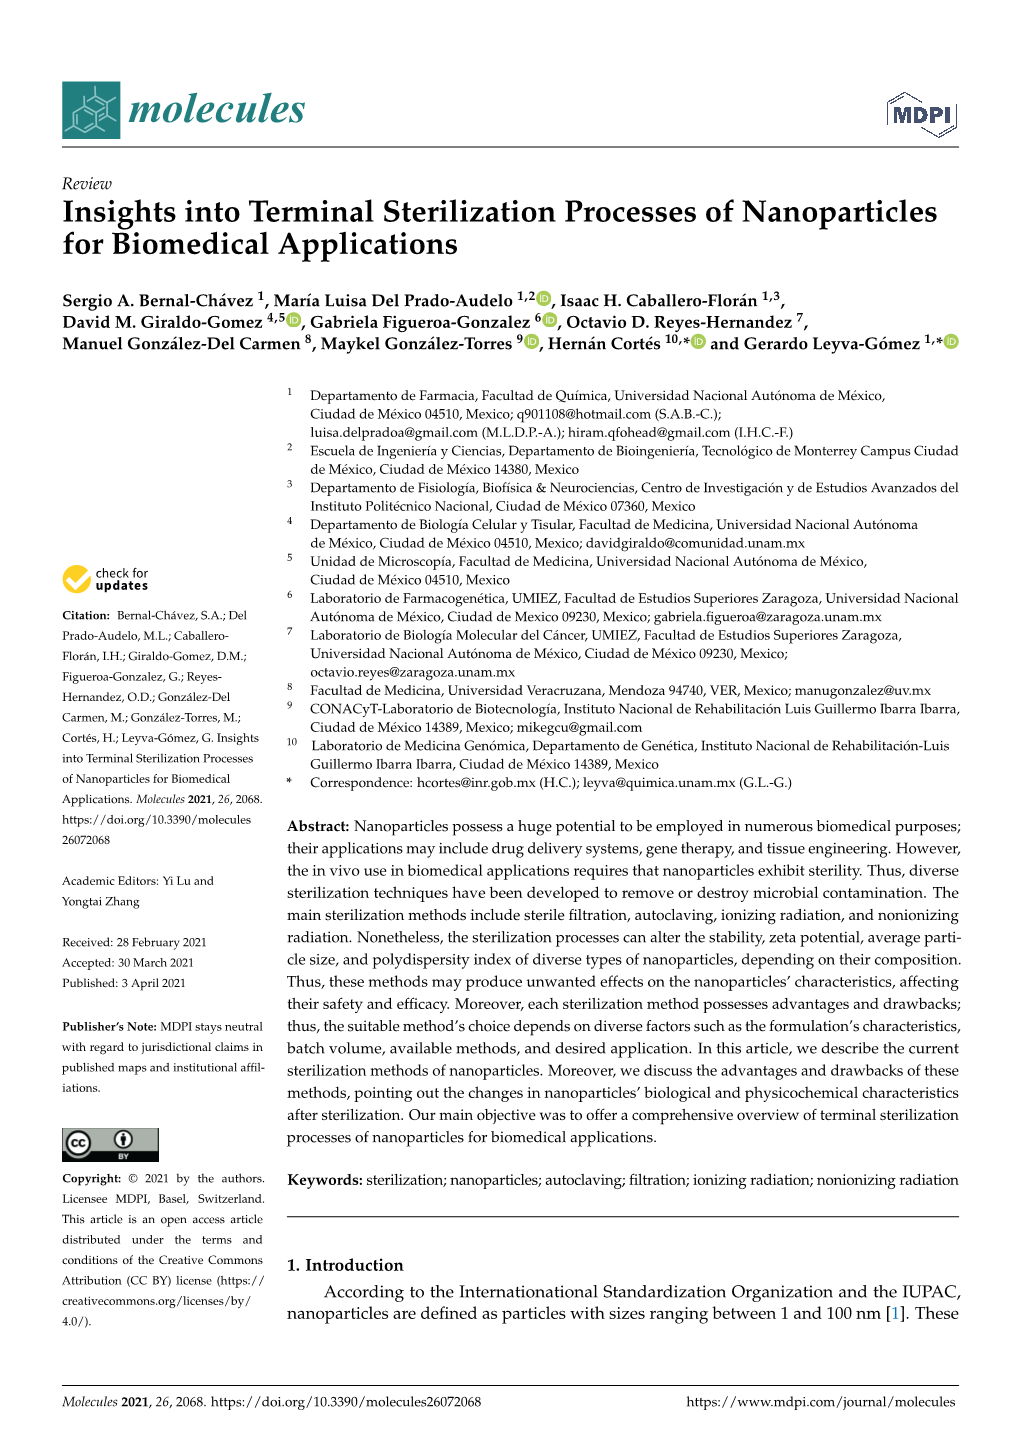 Insights Into Terminal Sterilization Processes of Nanoparticles for Biomedical Applications